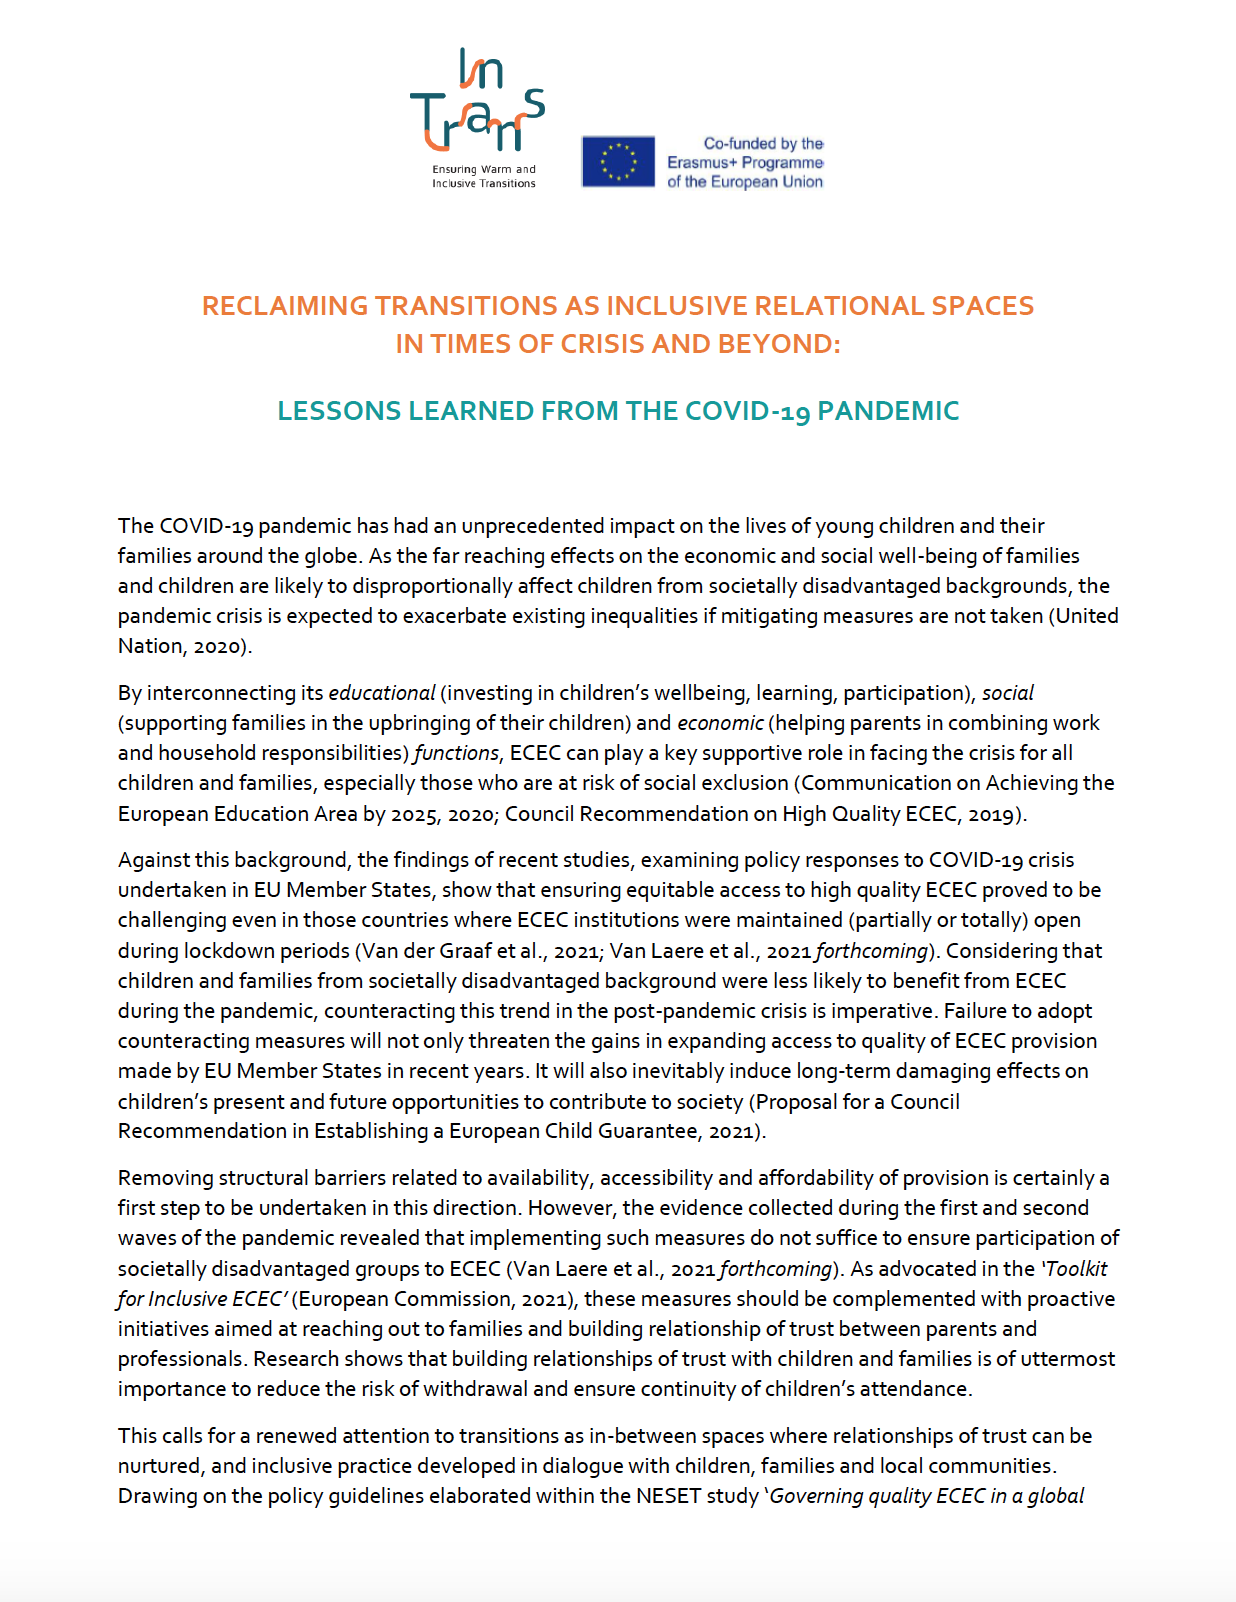 Reclaiming-transitions-as-inclusive-relational-spaces-in-times-of-crisis-and-beyond